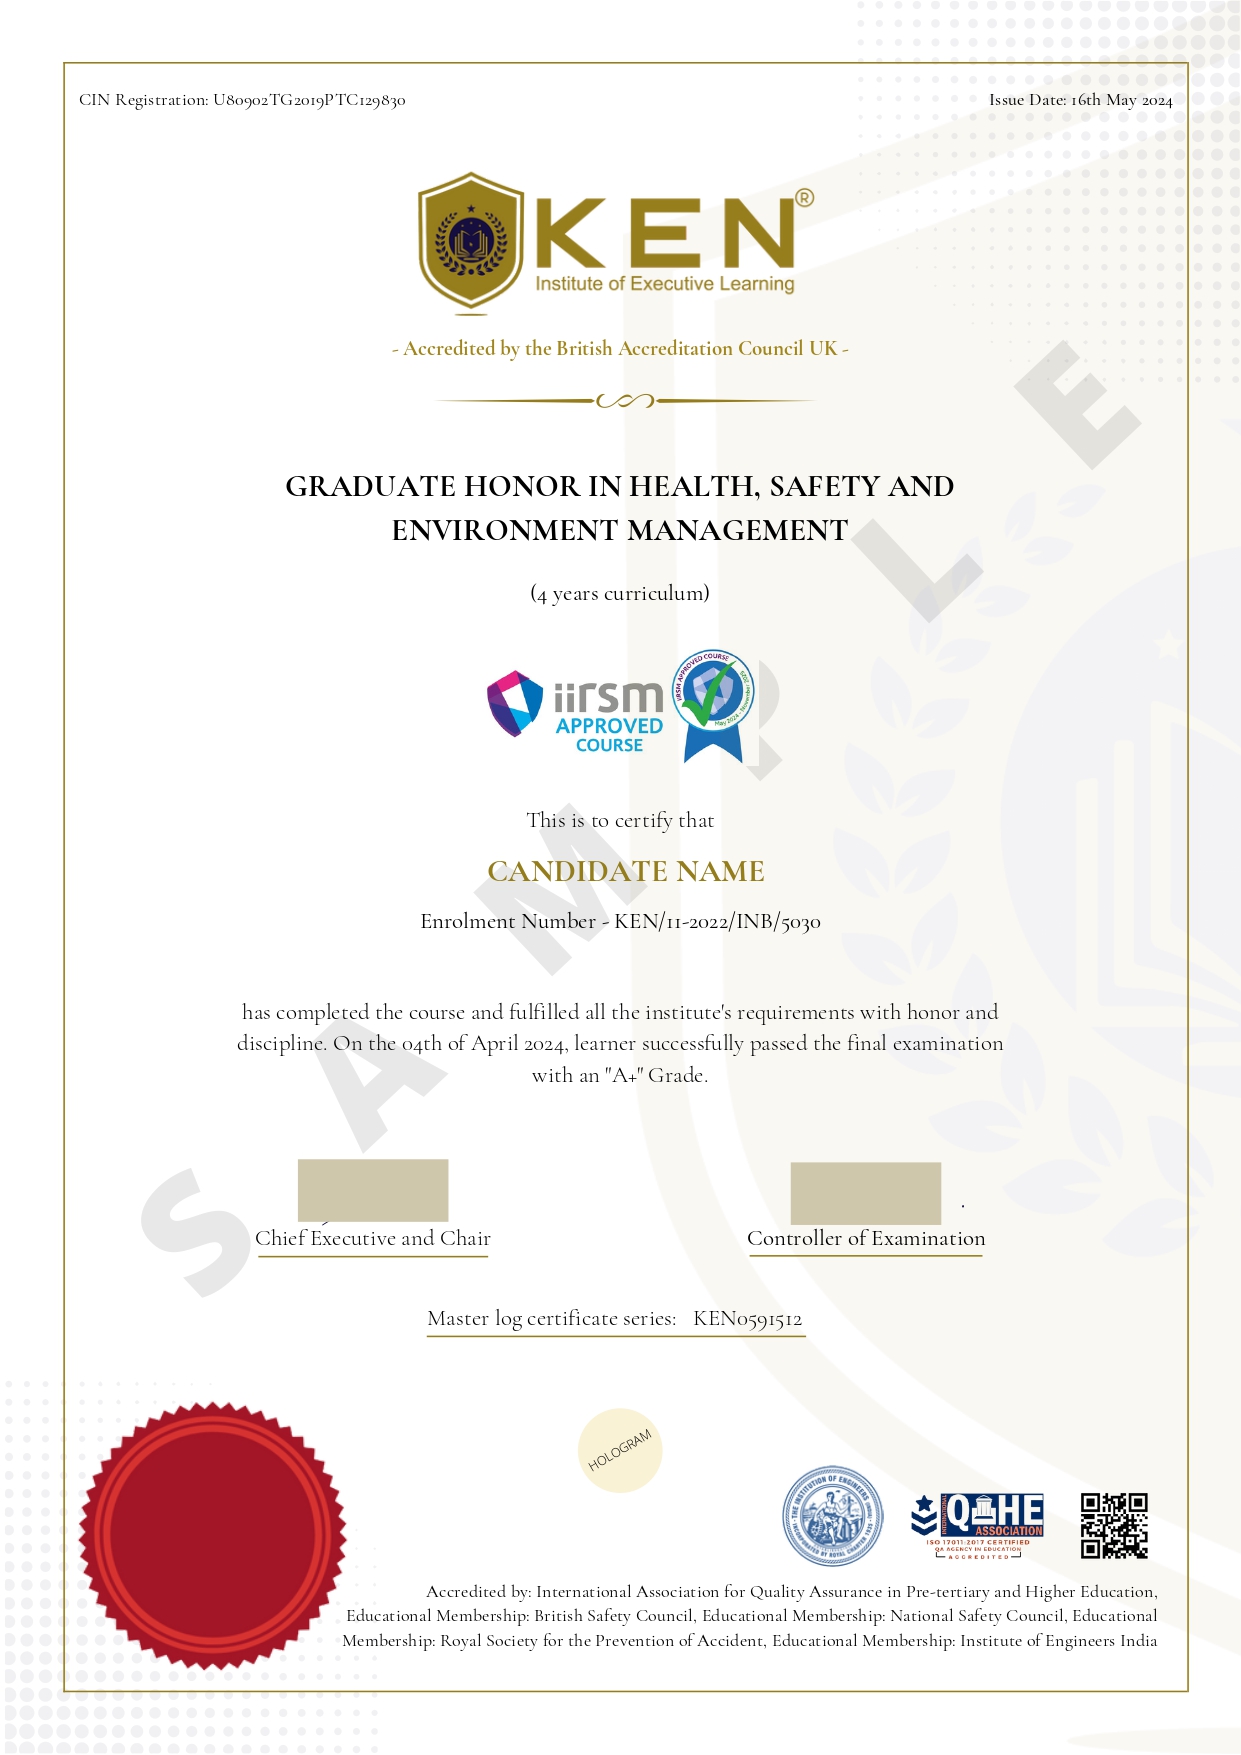 Graduate Honor in Health Safety and Environment Management